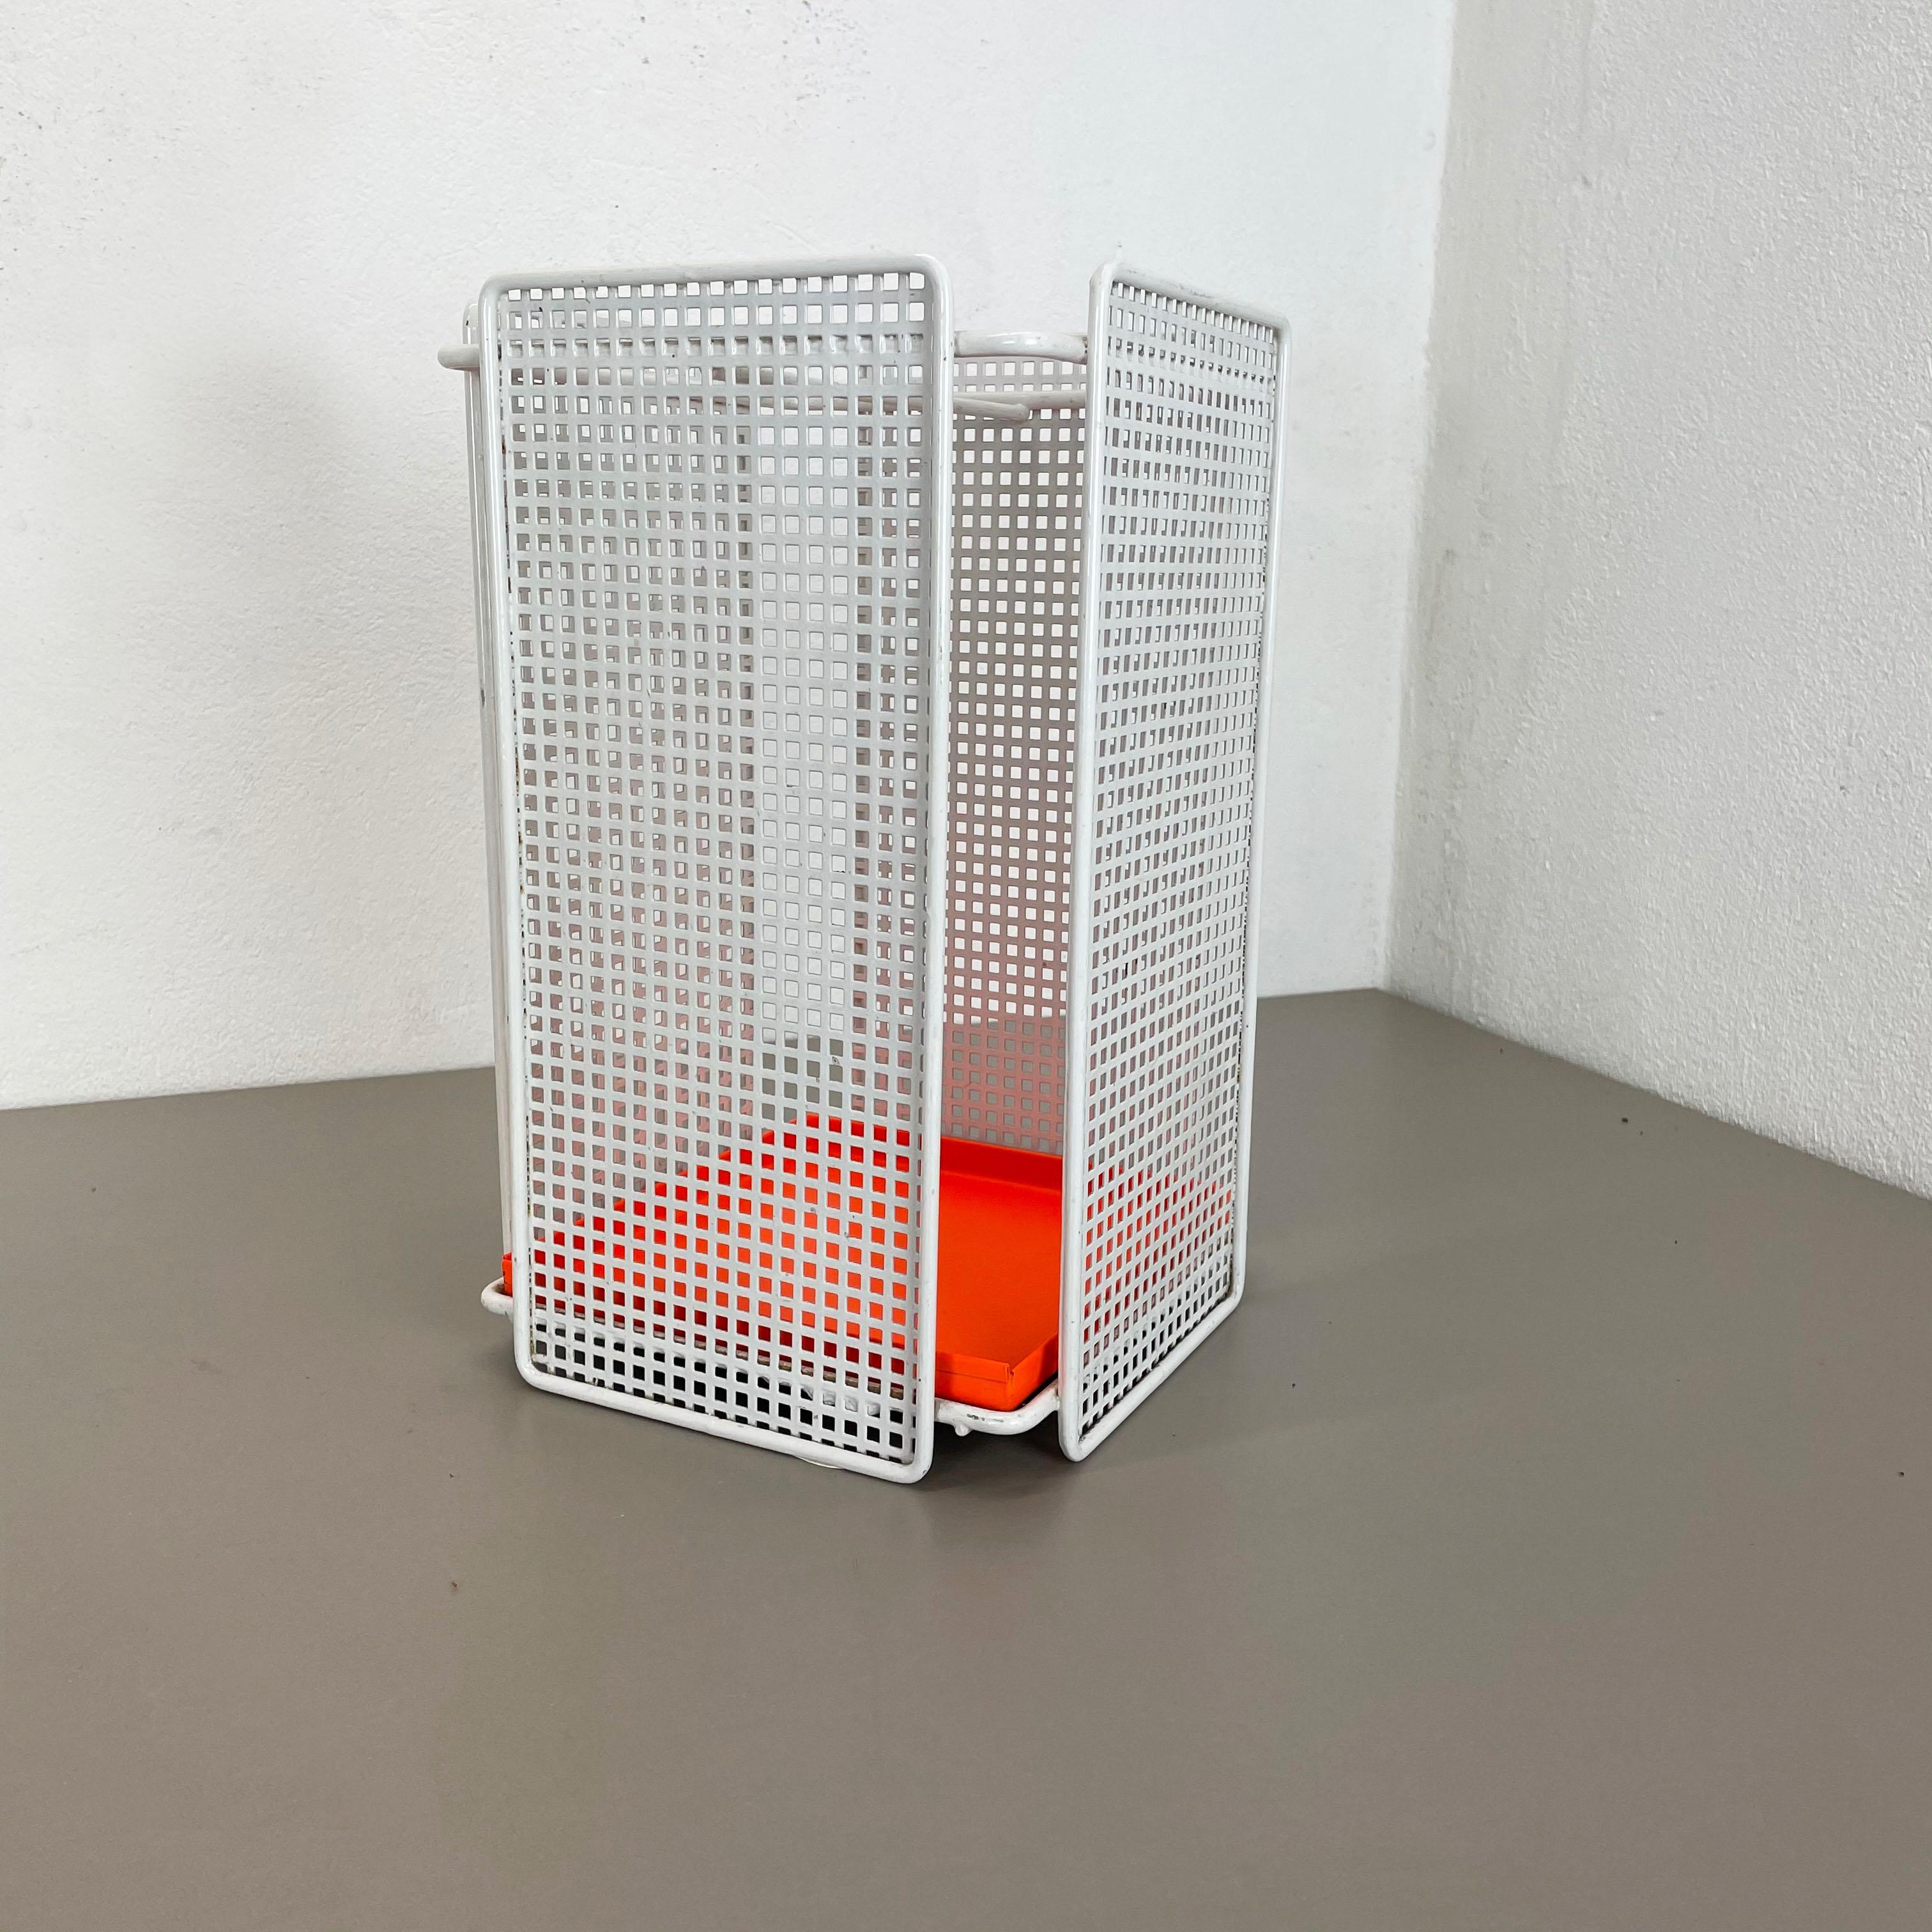 Article:

Modernist umbrella stand


  

this original vintage modernist umbrella stand was produced in the 1970s in France. it is made of solid metal with hole pattern perforation optic and and orange metal dipping shell at the bottom. the design